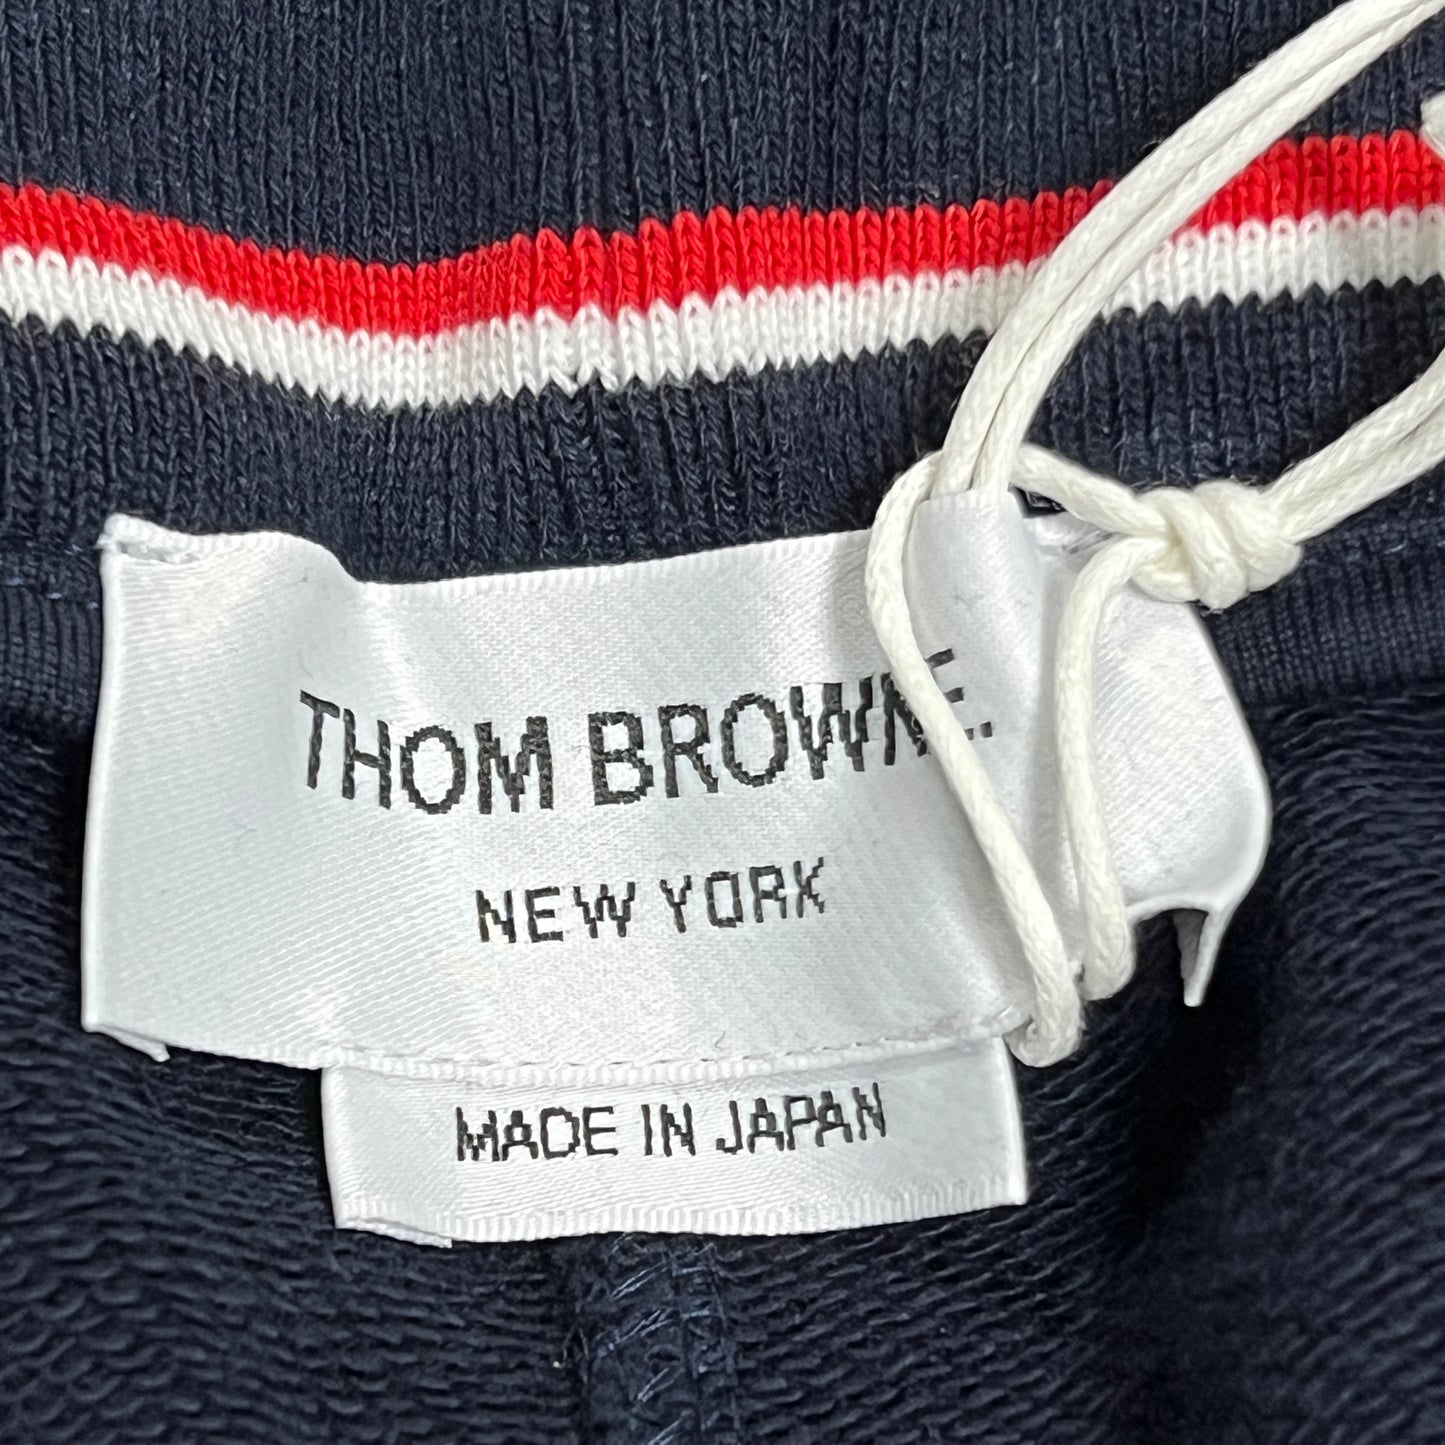 THOM BROWNE Classic Sweat pants w/Engineered 4 Bar Loop Back Navy Size 1 (New)